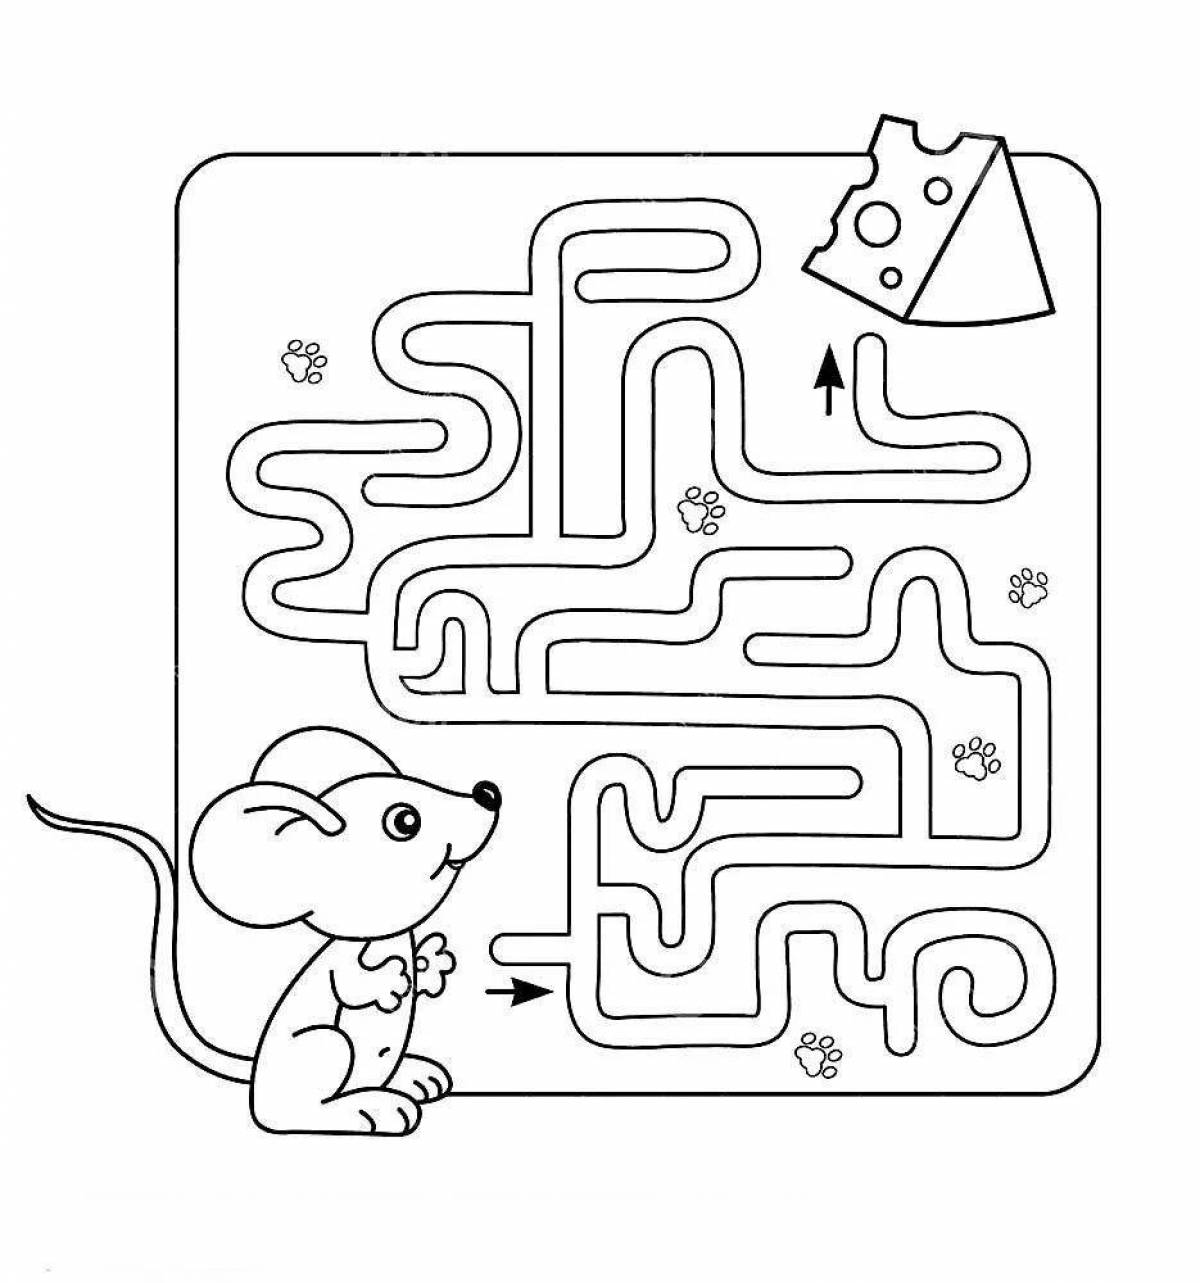 Creative coloring maze for kids